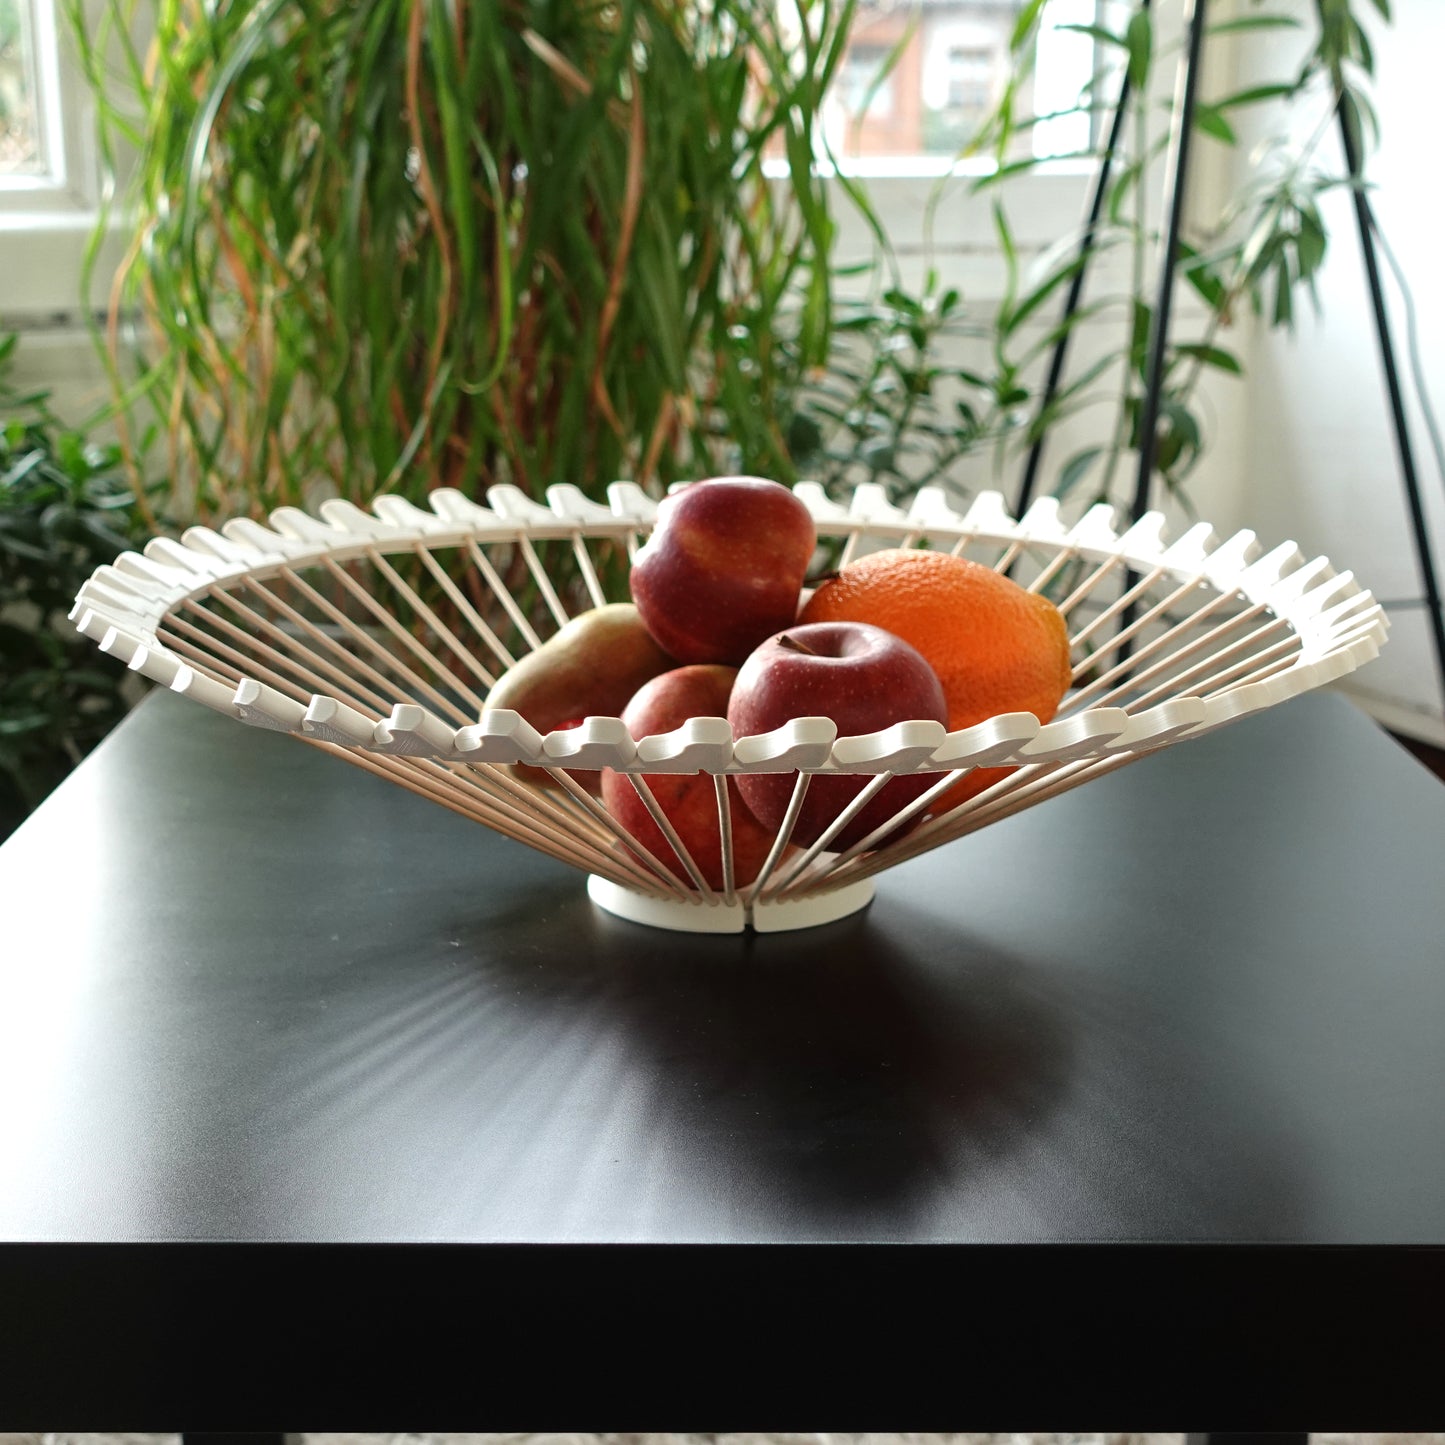 DESIGNER SUN FRUIT BOWL TABLEWARE KITCHEN AND DINING GIFTS HOUSE WARMING